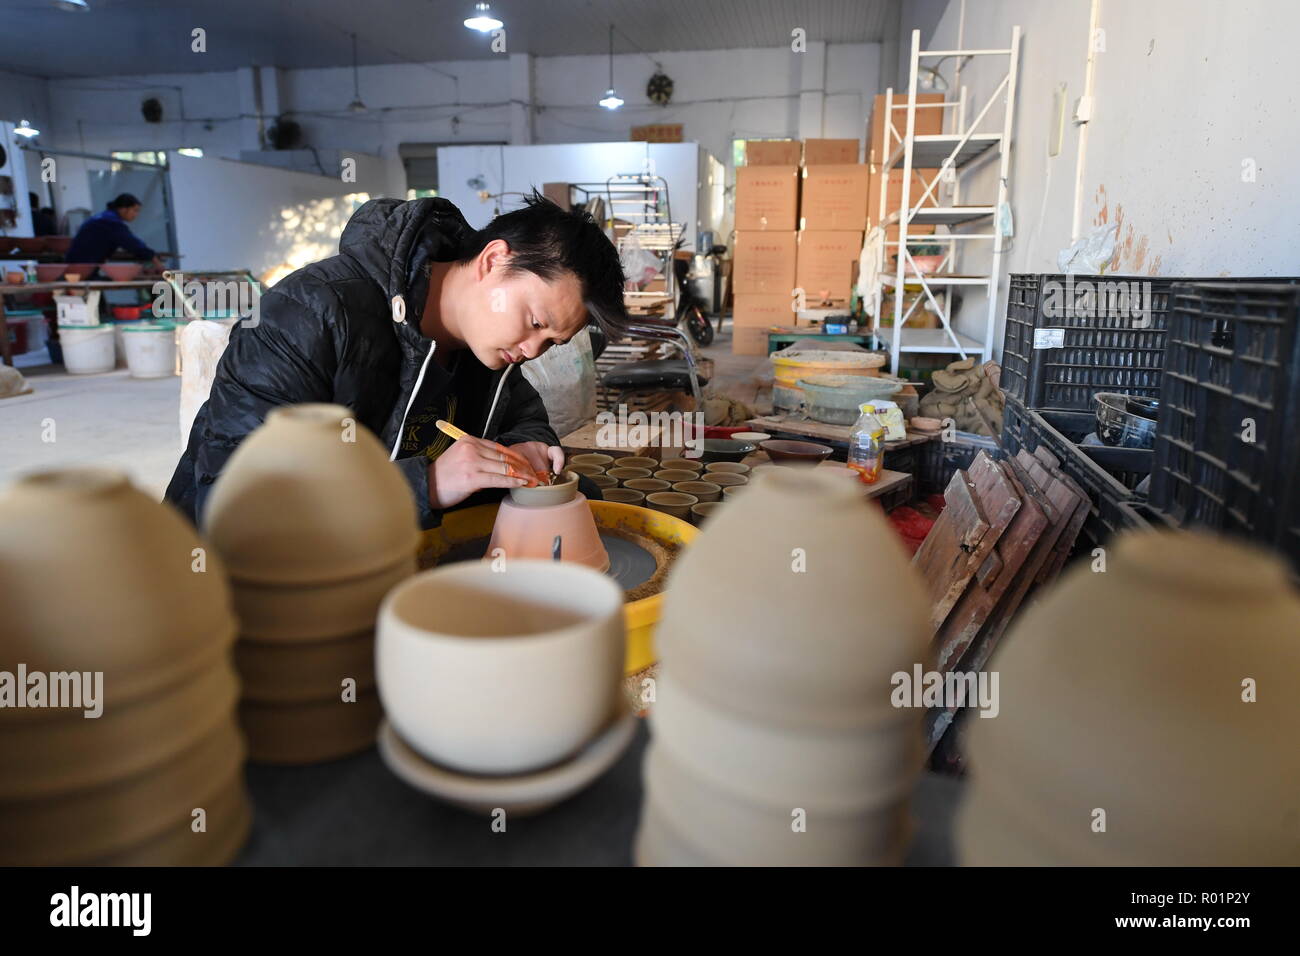 (181031) -- JIANYANG, Oct. 31, 2018 (Xinhua) -- A craftsman polishes the body of a semifinished "Jian Zhan", a kind of black glaze bowl, at a workshop in Jianyang, southeast China's Fujiang Province, Oct. 29, 2018. "Jian Zhan", a kind of temmoku glaze or black glaze porcelain, was then used only by emperors of ancient China's Song Dynasty (960-1279). Famous for its nobility and gorgeousness, "Jian Zhan" was numerously exported overseas through the Silk Road on the sea. However, after Song Dynasty, those traditional firing techniques to make "Jian Zhan" failed to be handed down to future genera Stock Photo